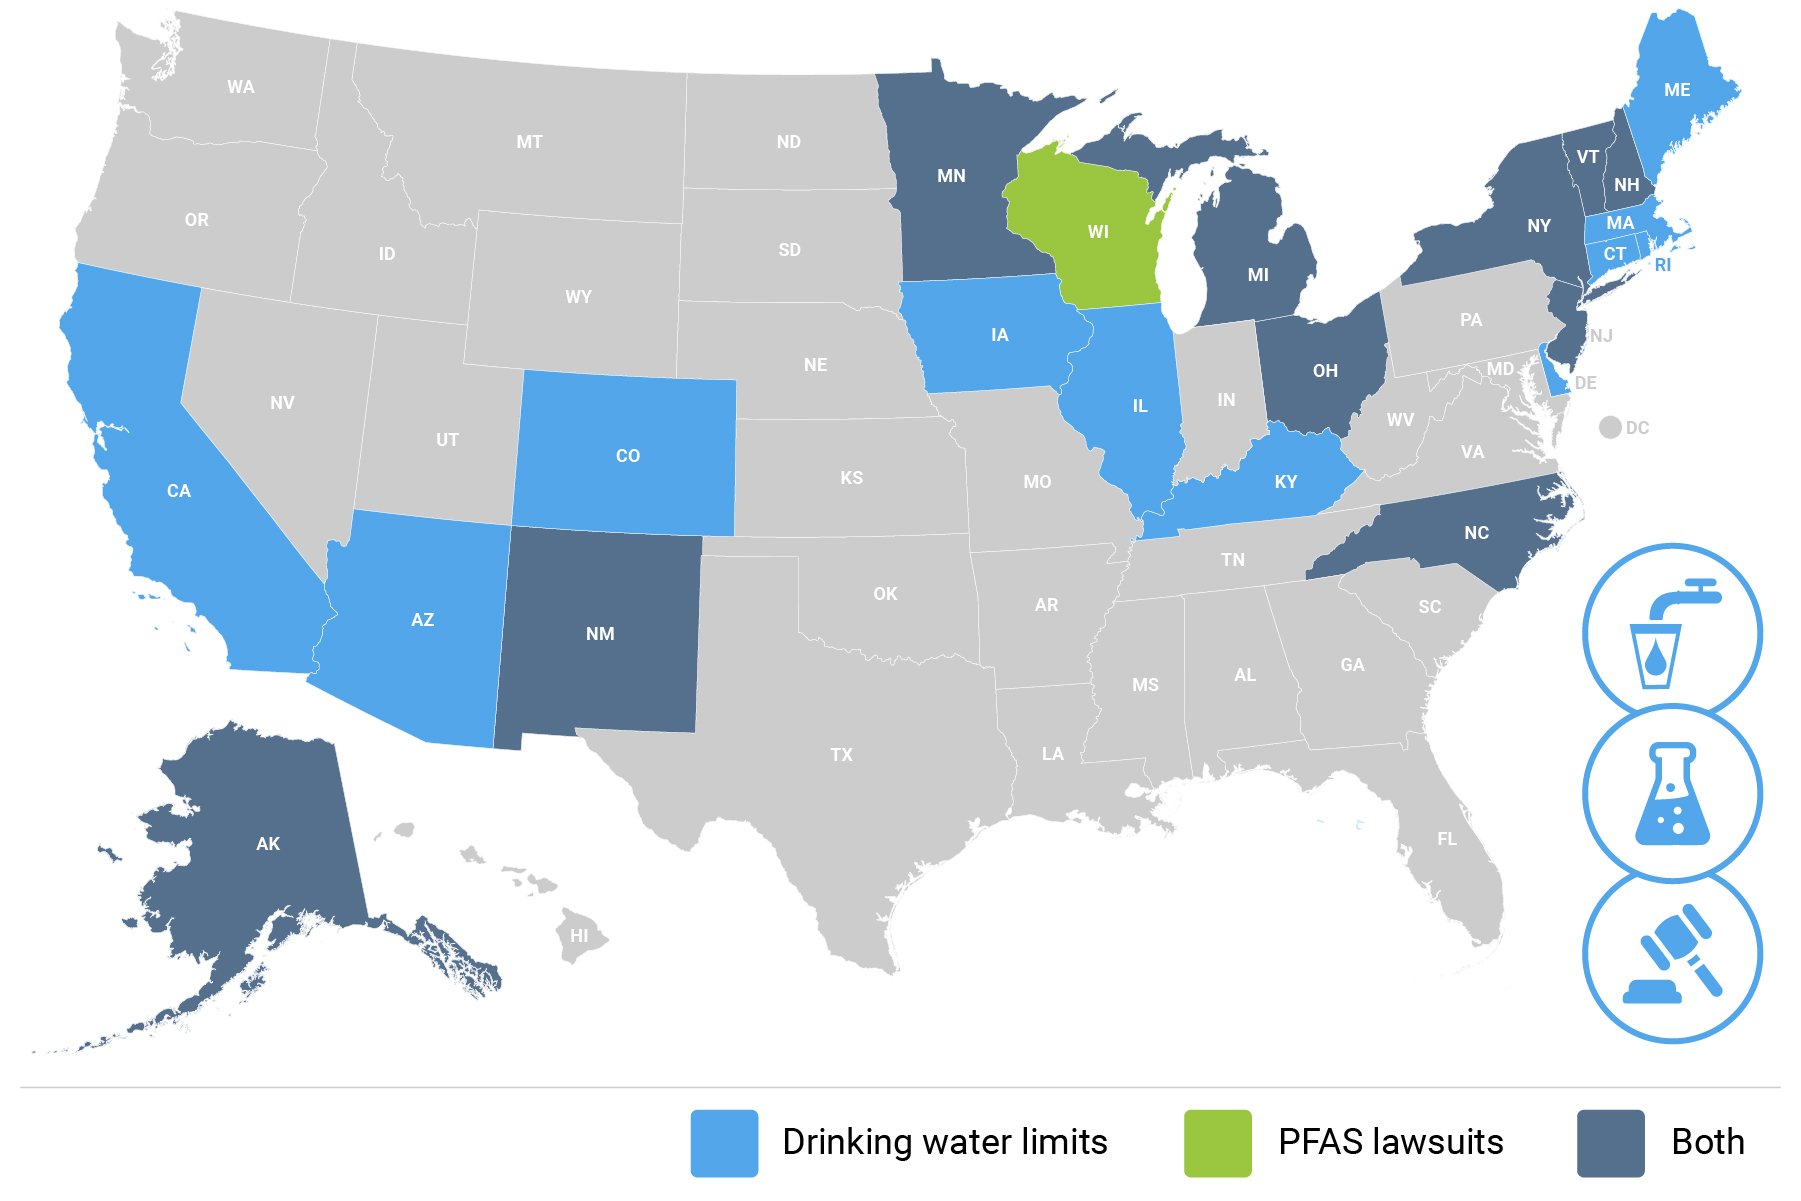 PFAS Lawsuits and Drinking Water Limits in US